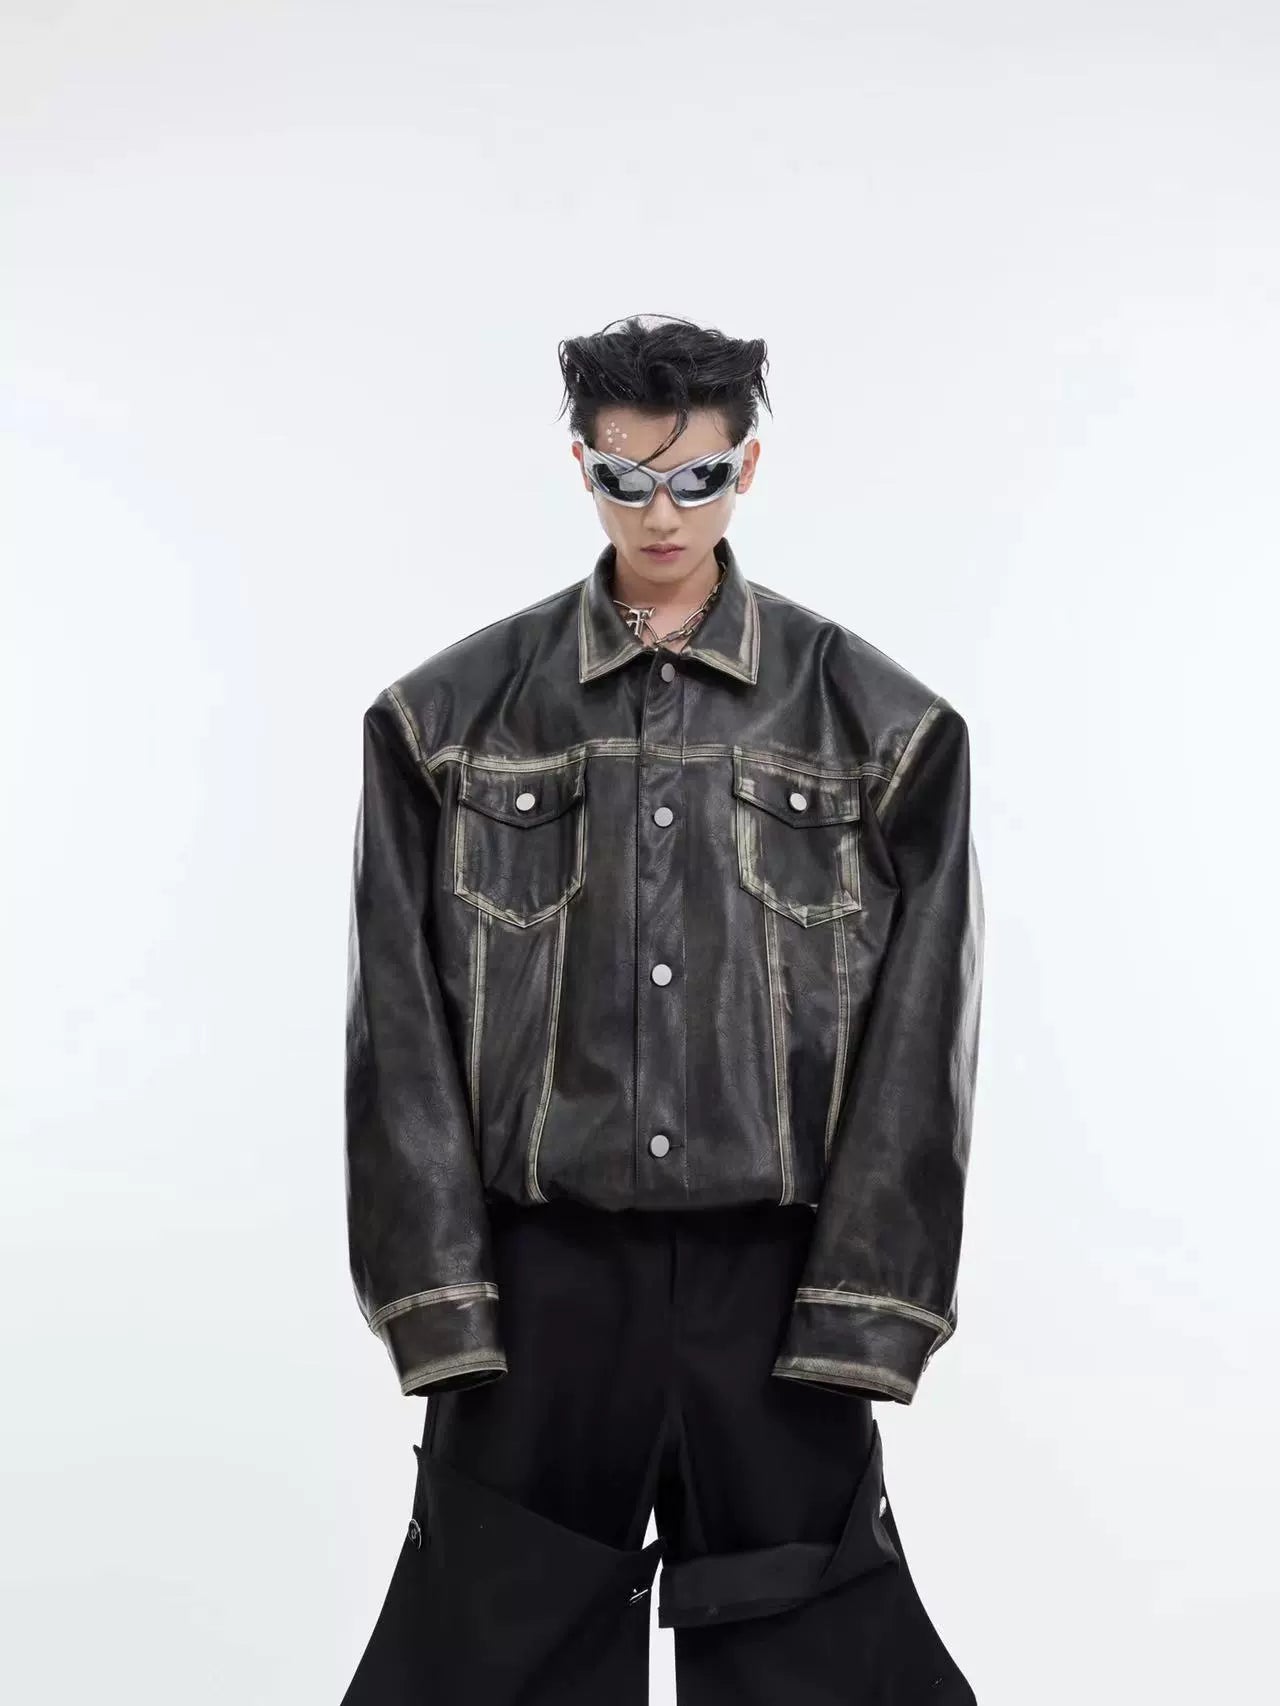 Cultur E24ss, a heavyweight vintage rubbed leather distressed padded-shoulder jacket, a jacket, a niche cropped silhouette, a loose-fitting leather jacket